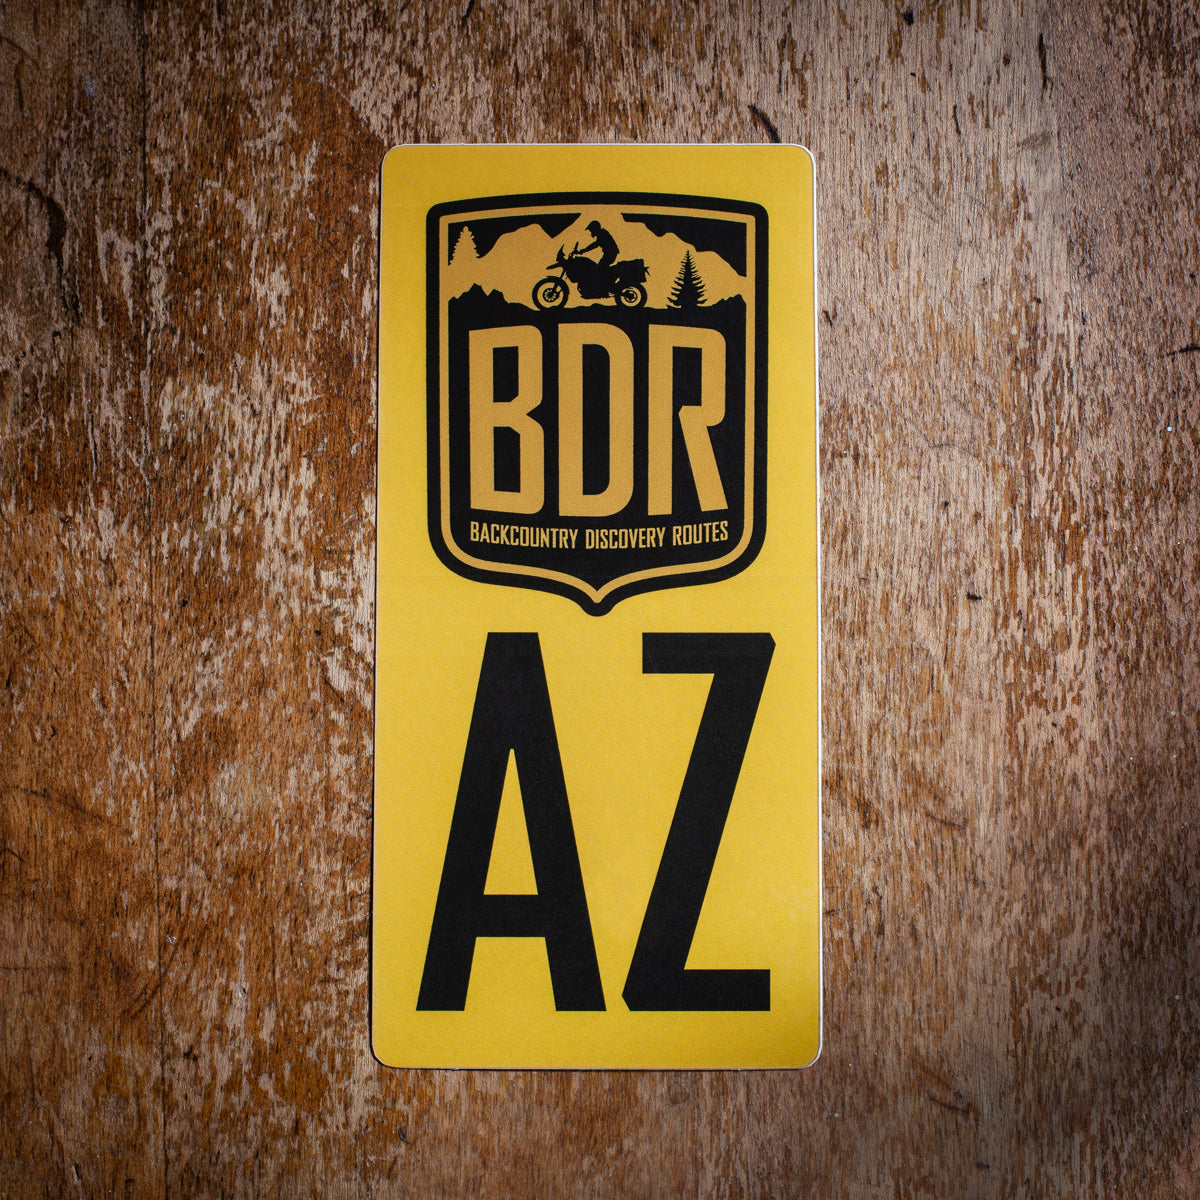 AZBDR Route Decal